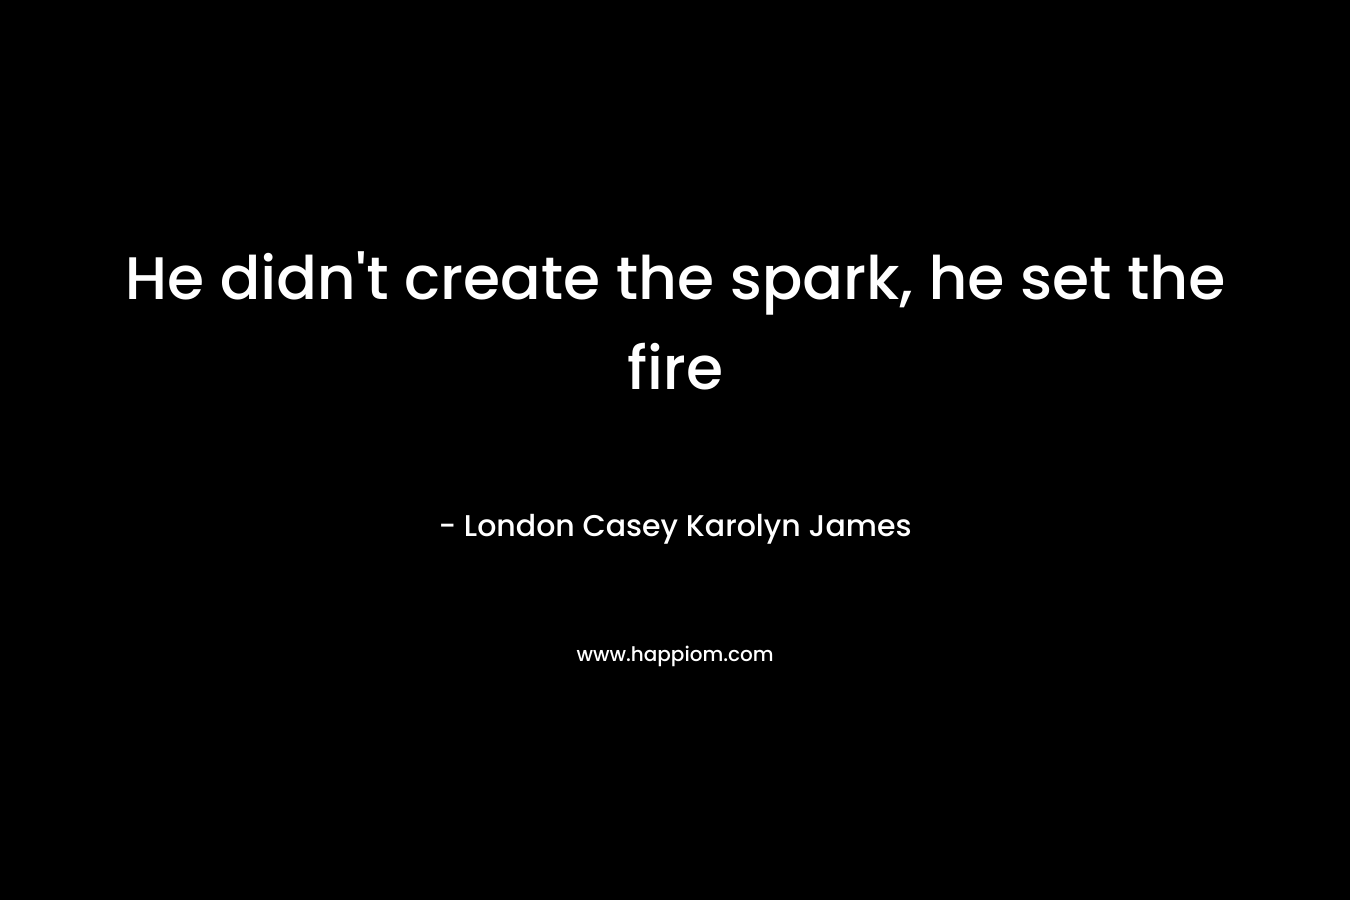 He didn’t create the spark, he set the fire – London Casey Karolyn James